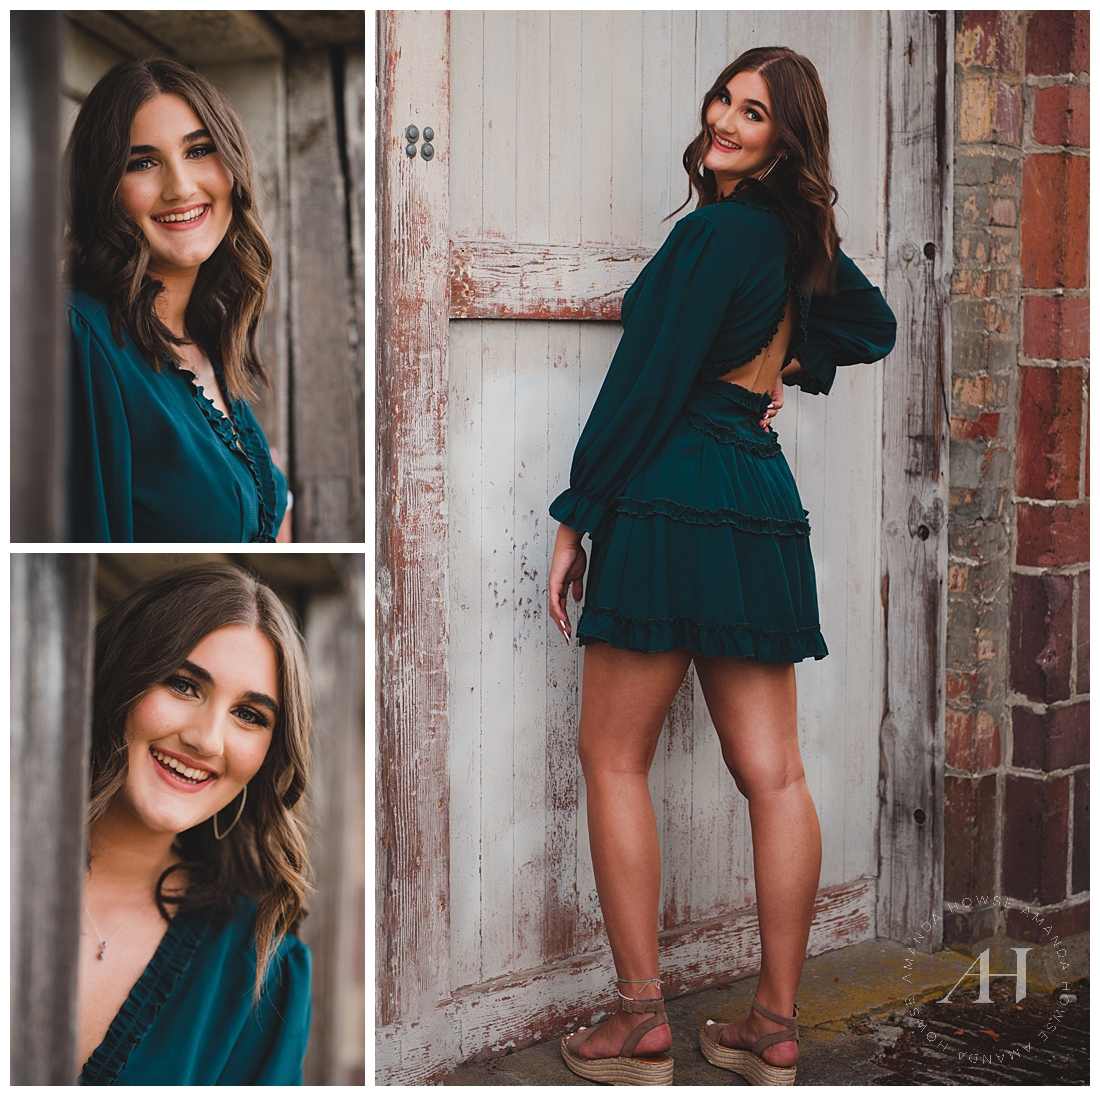 Rustic Senior Portraits with Brick Walls and Teal Dress | Photographed by the Best Tacoma Senior Photographer Amanda Howse Photography